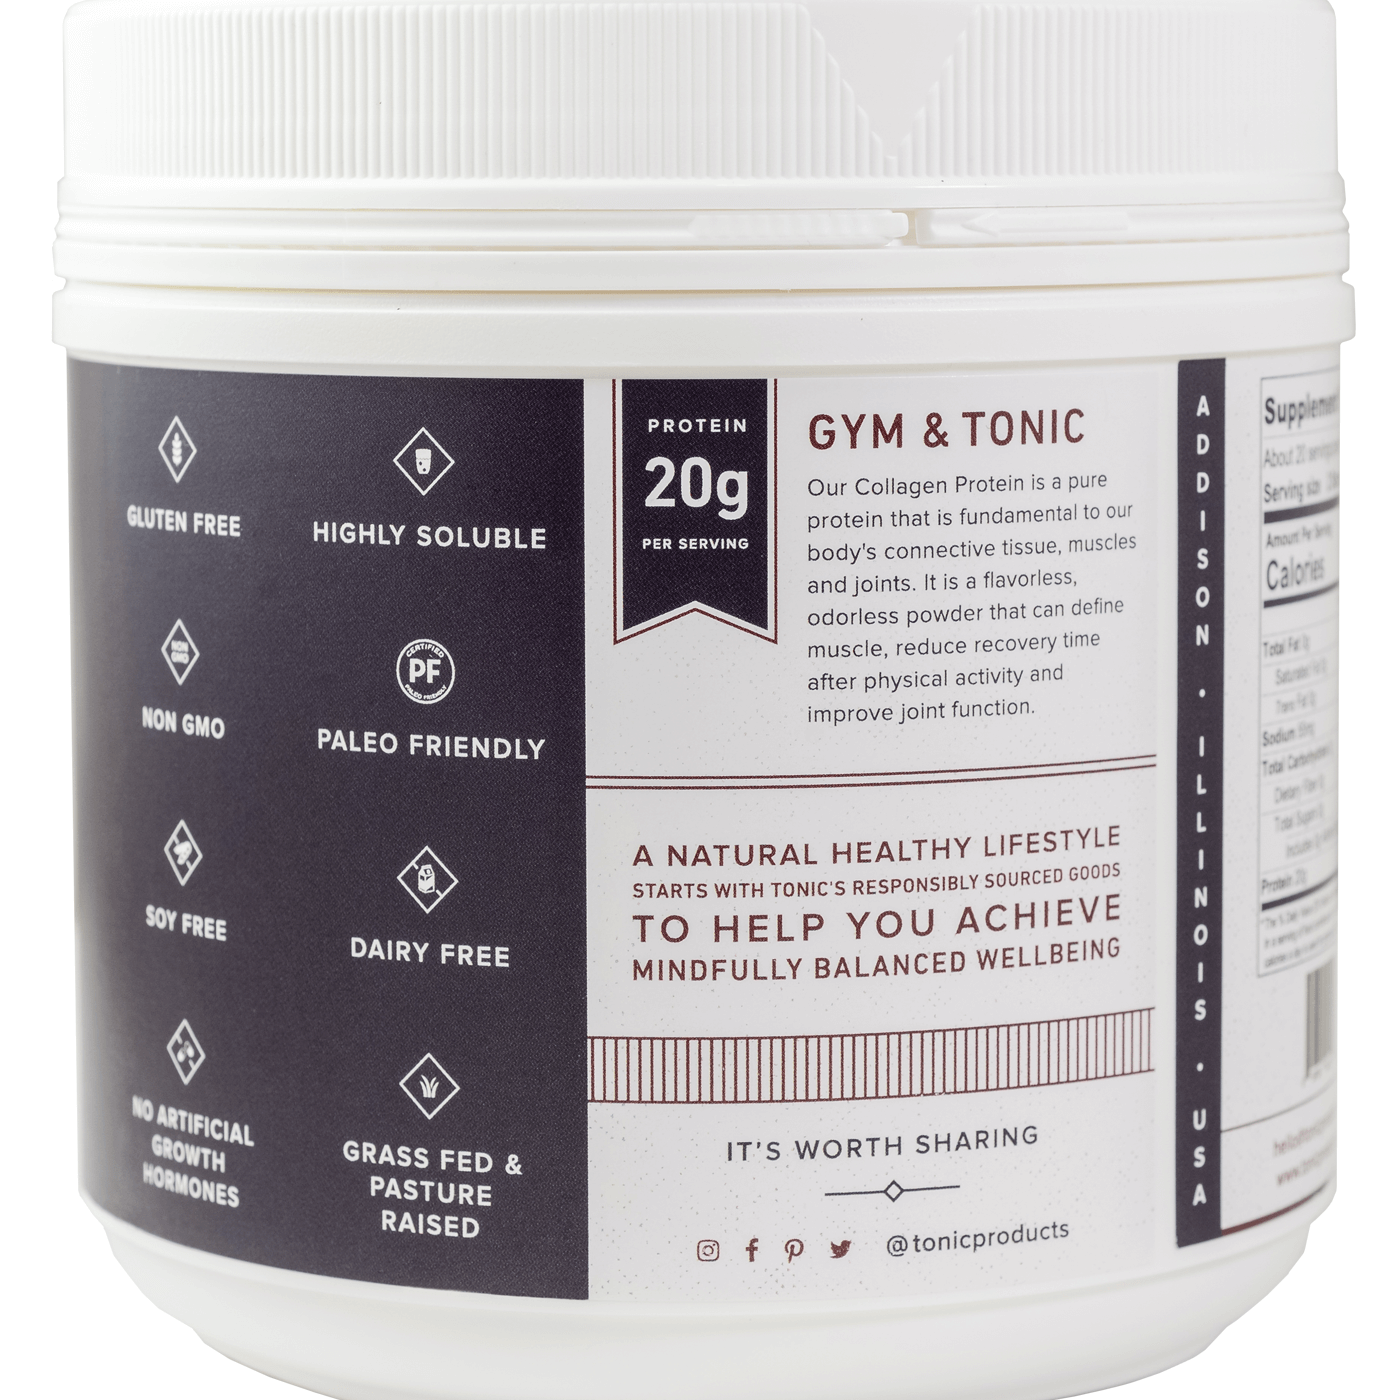 Tonic Products Gym & Tonic - Collagen Protein